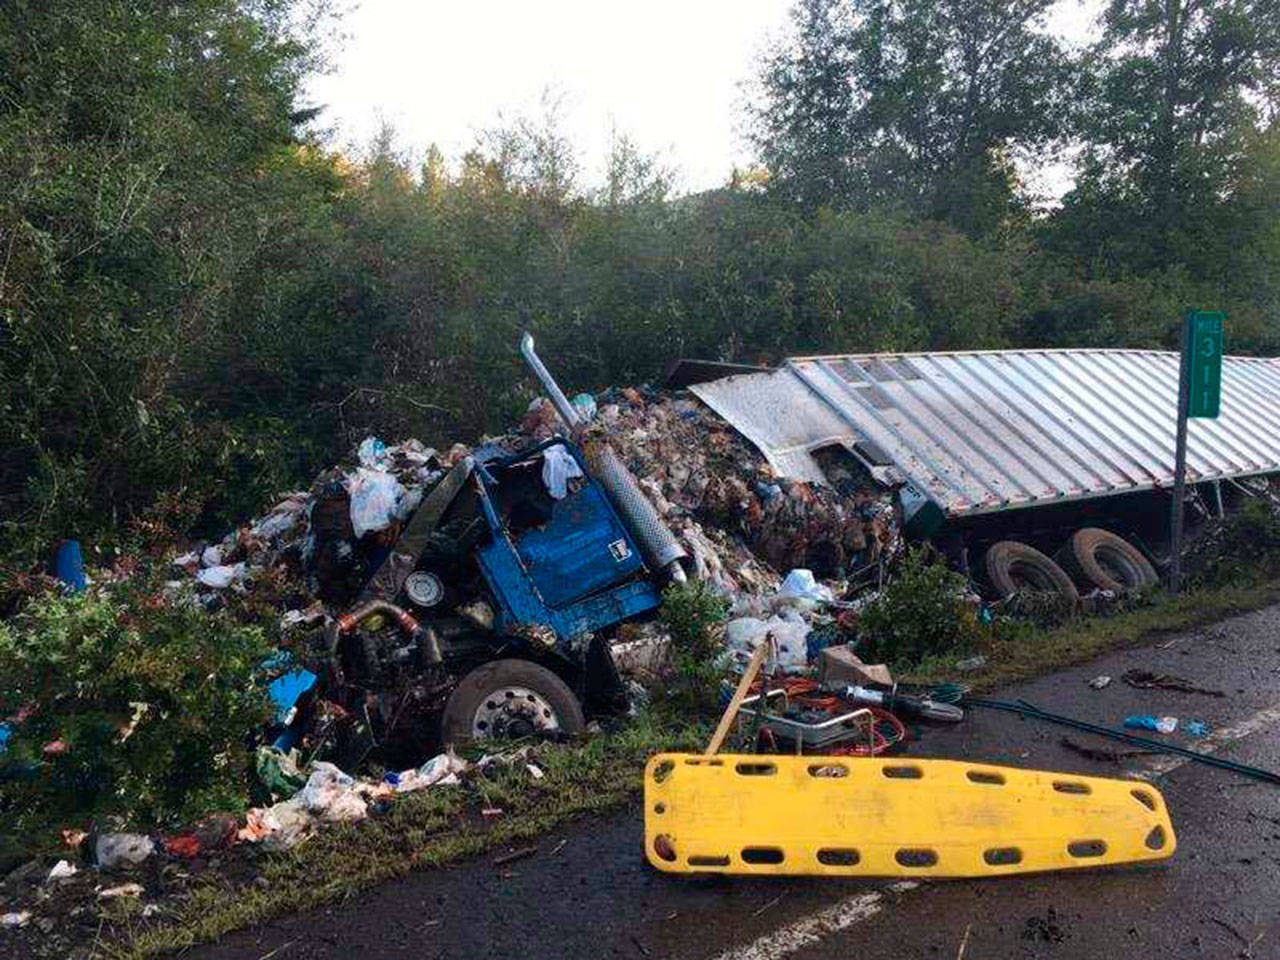 A semi-truck with a 50-foot trailer crashed into a ditch on U.S. Highway 101 on Monday morning. The driver was airlifted to Harborview Medical Center in Seattle. (Washington State Patrol)